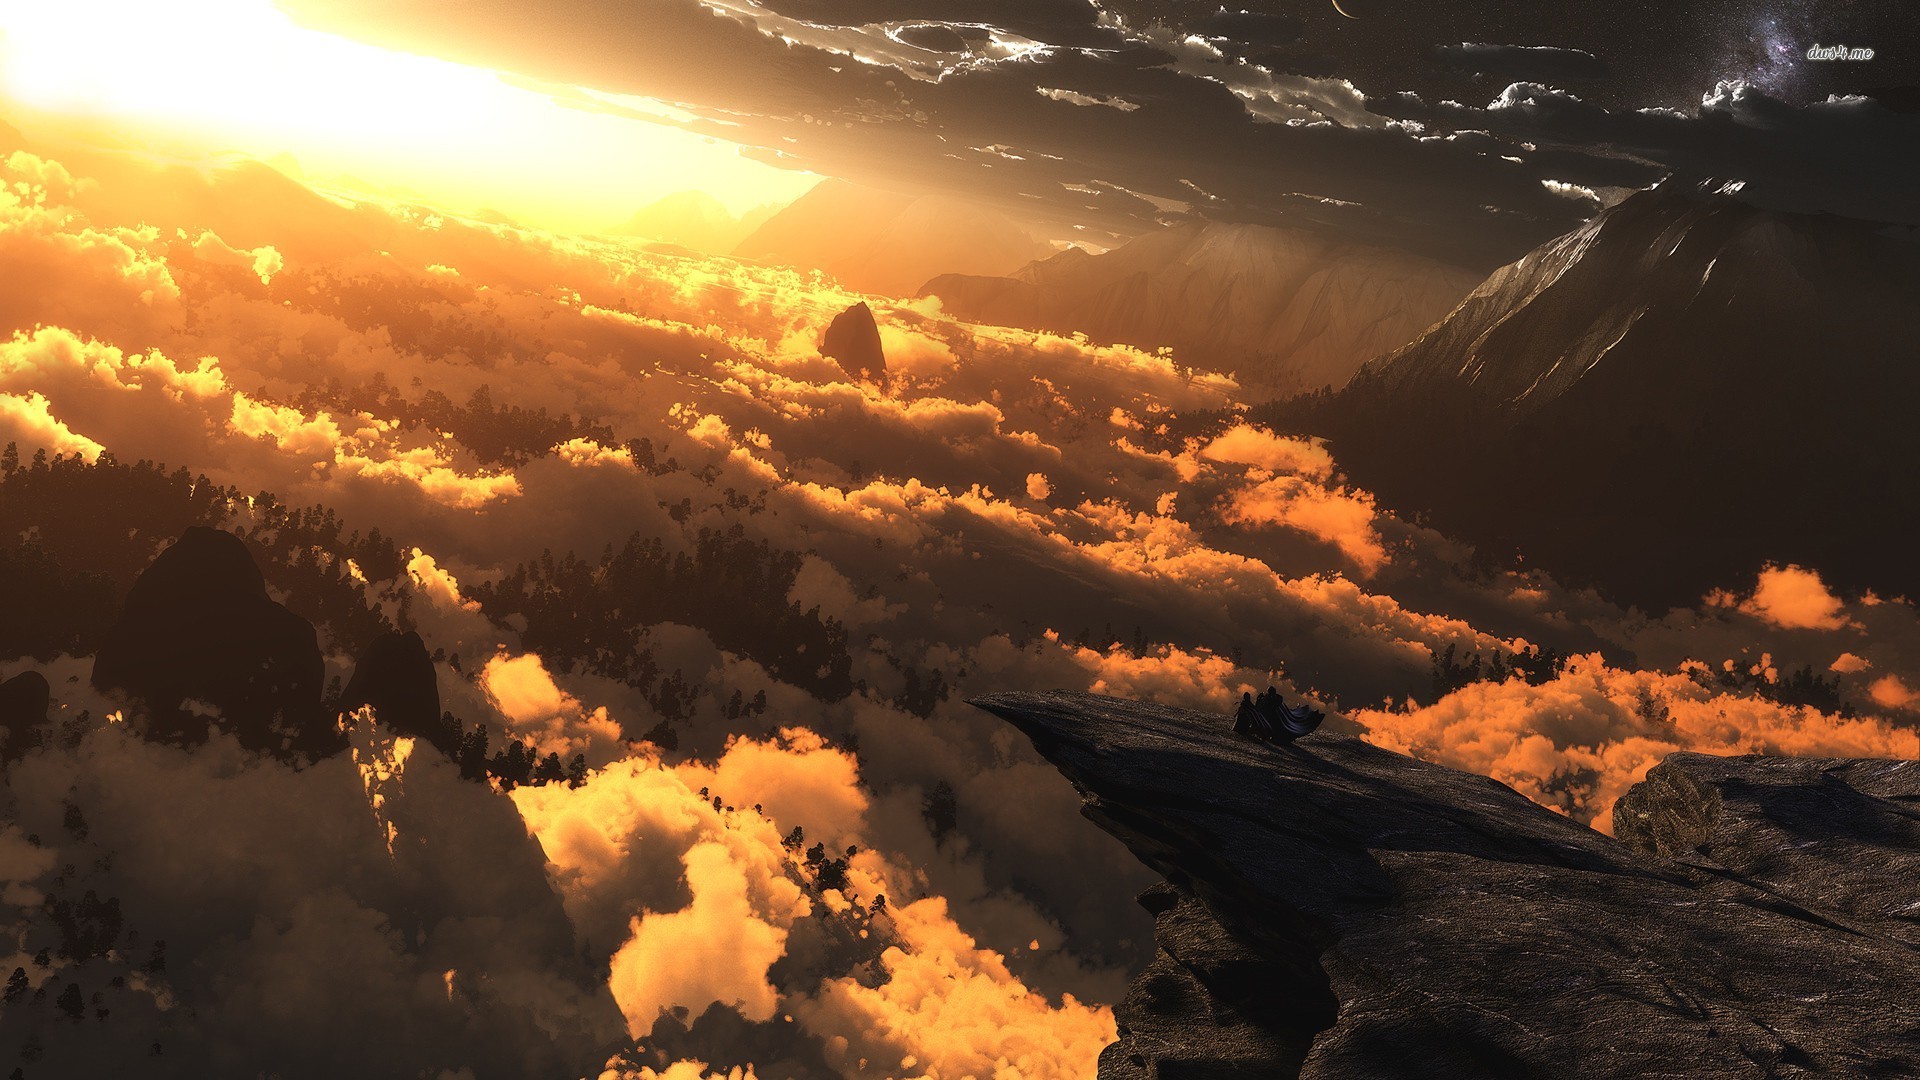 Above The Clouds 4k - HD Wallpaper 